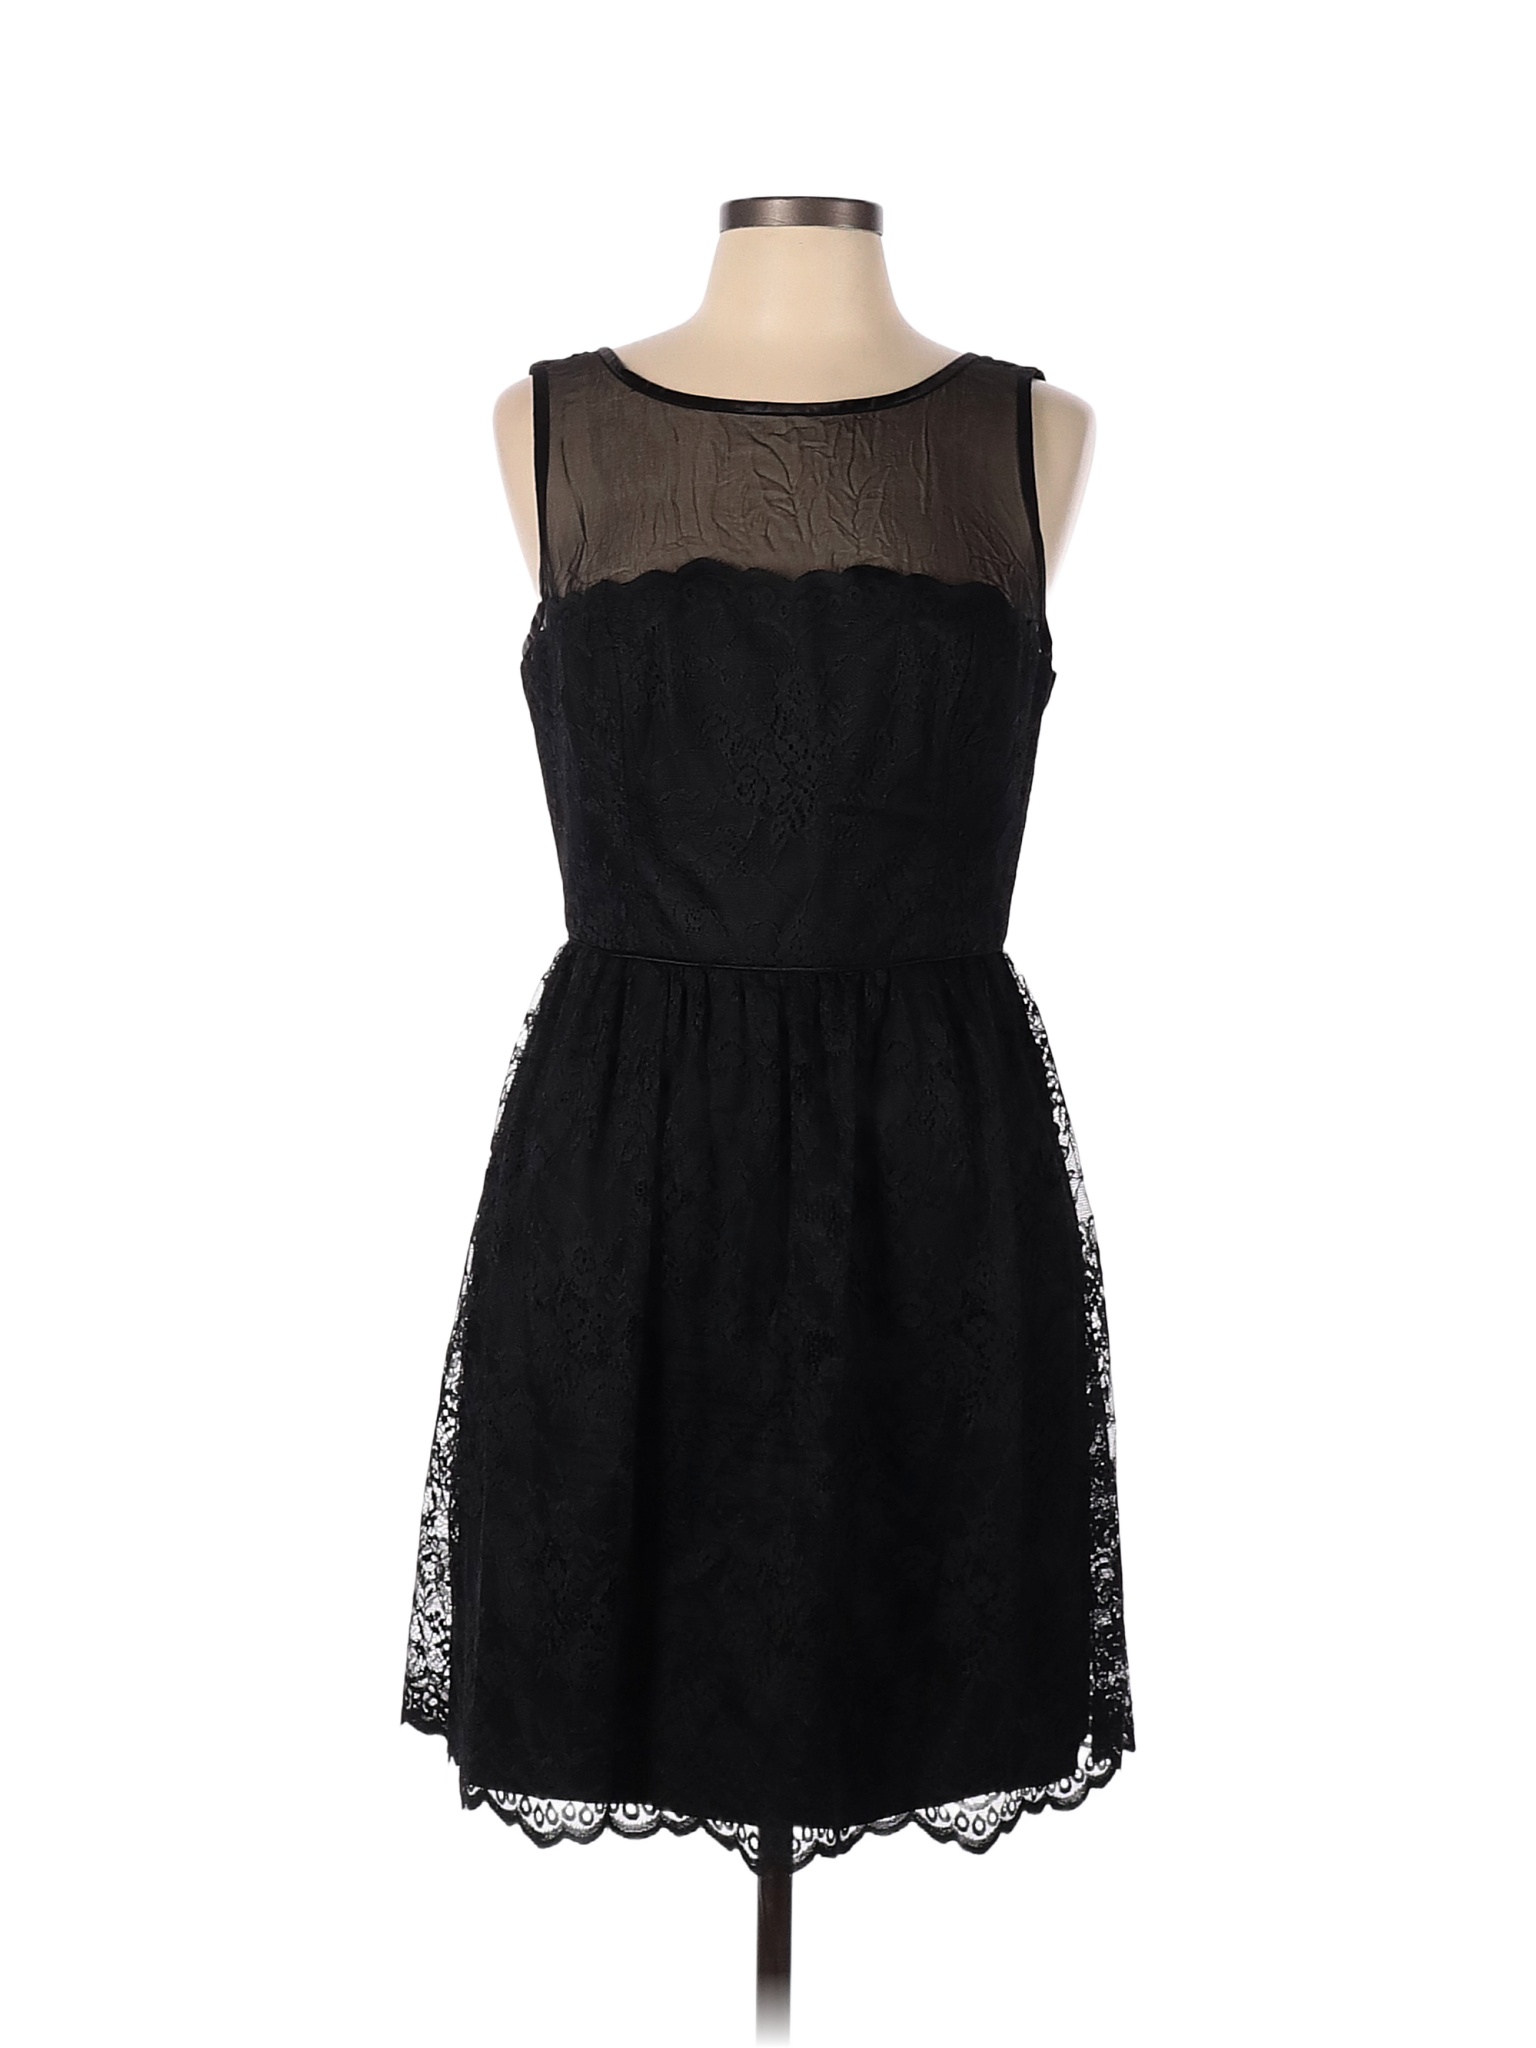 Trina Turk 100% Polyester Solid Black Cocktail Dress Size 10 - 82% off ...